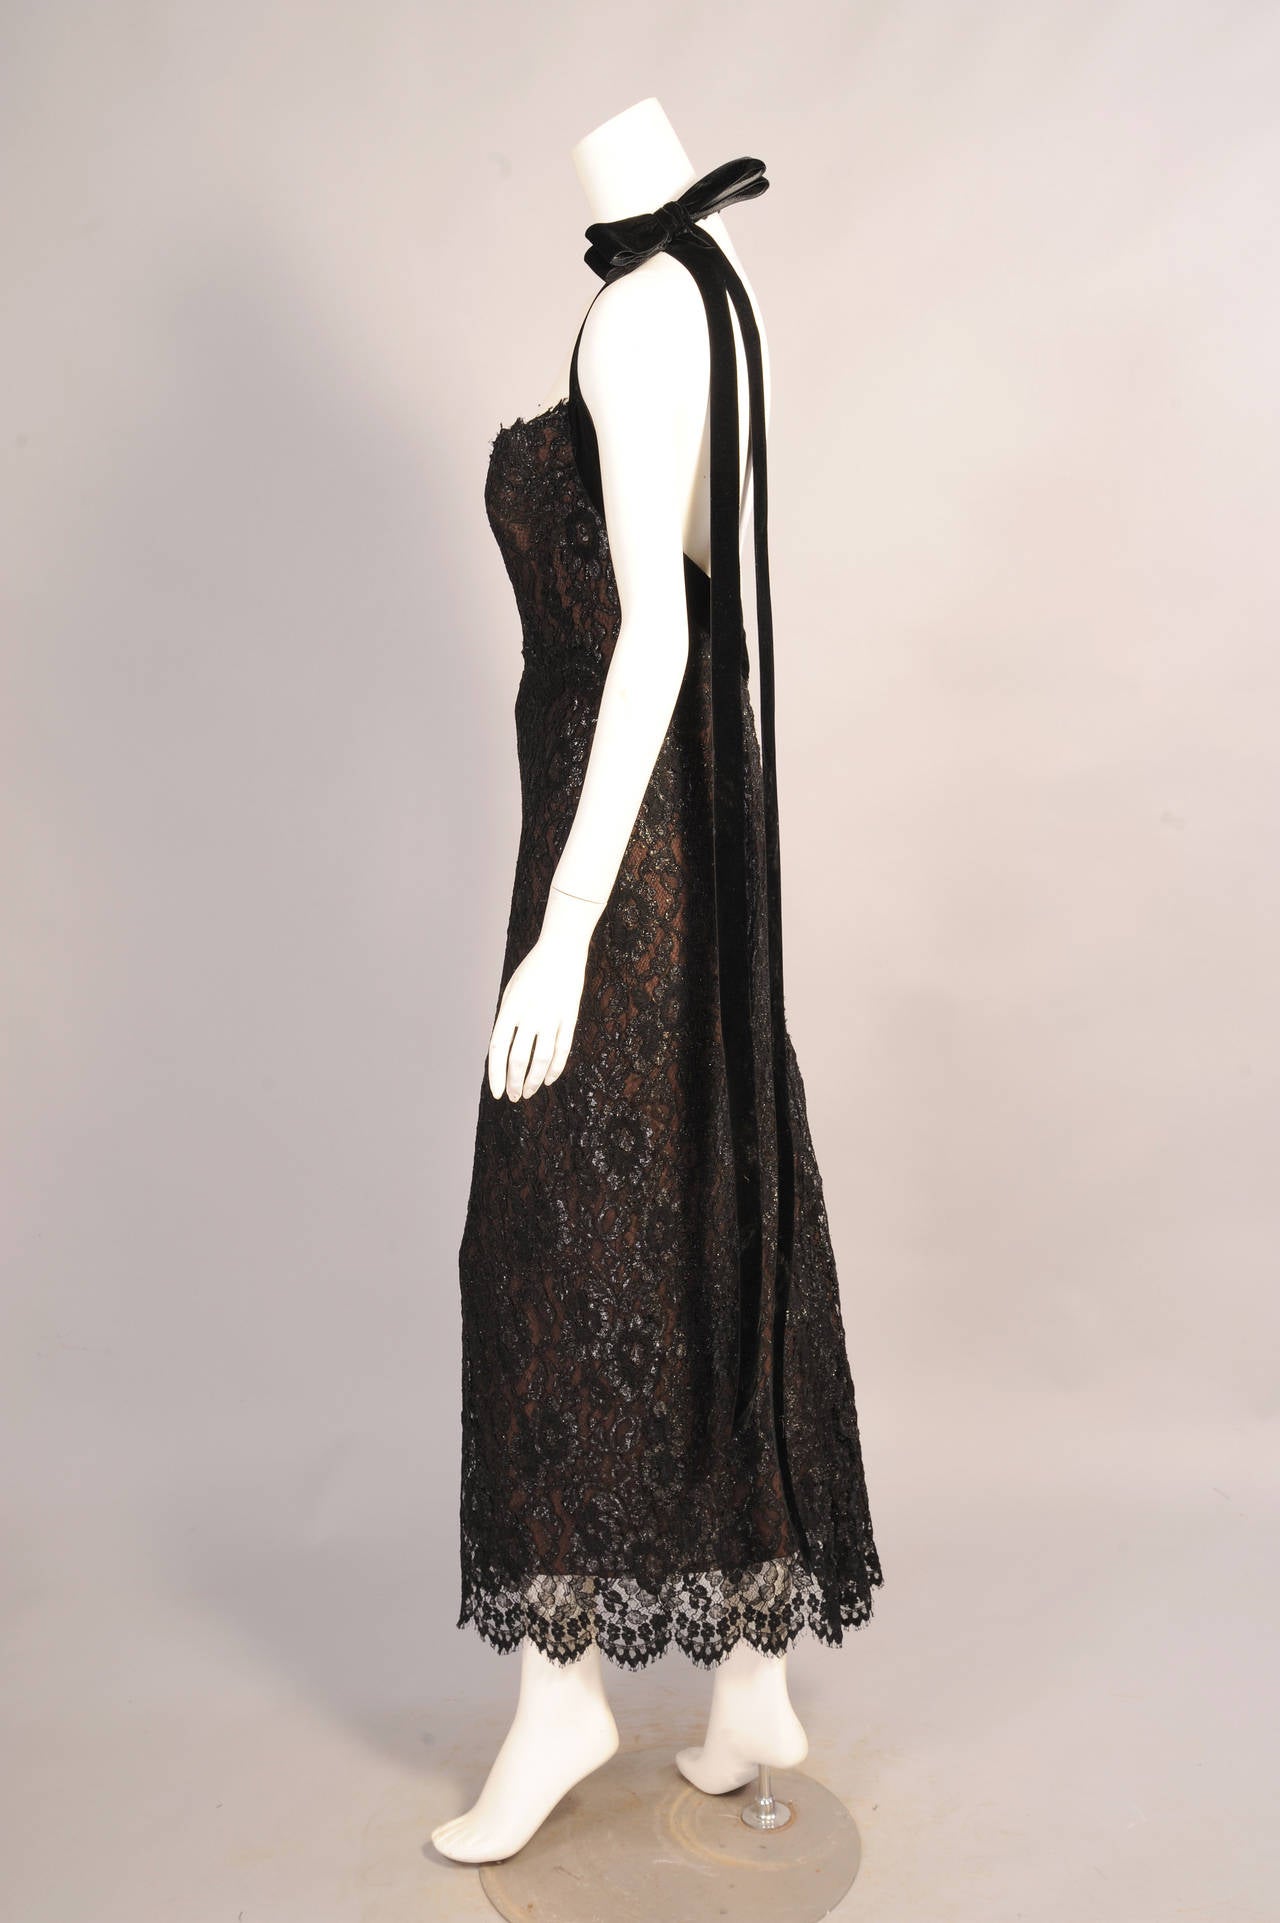 Glistening black lace over black chiffon over nude chiffon creates a subtle and striking contrast on this sexy halter dress from Bob Mackie. The bodice is fully boned and trimmed with a wide black velvet ribbon. The halter hooks at the center back